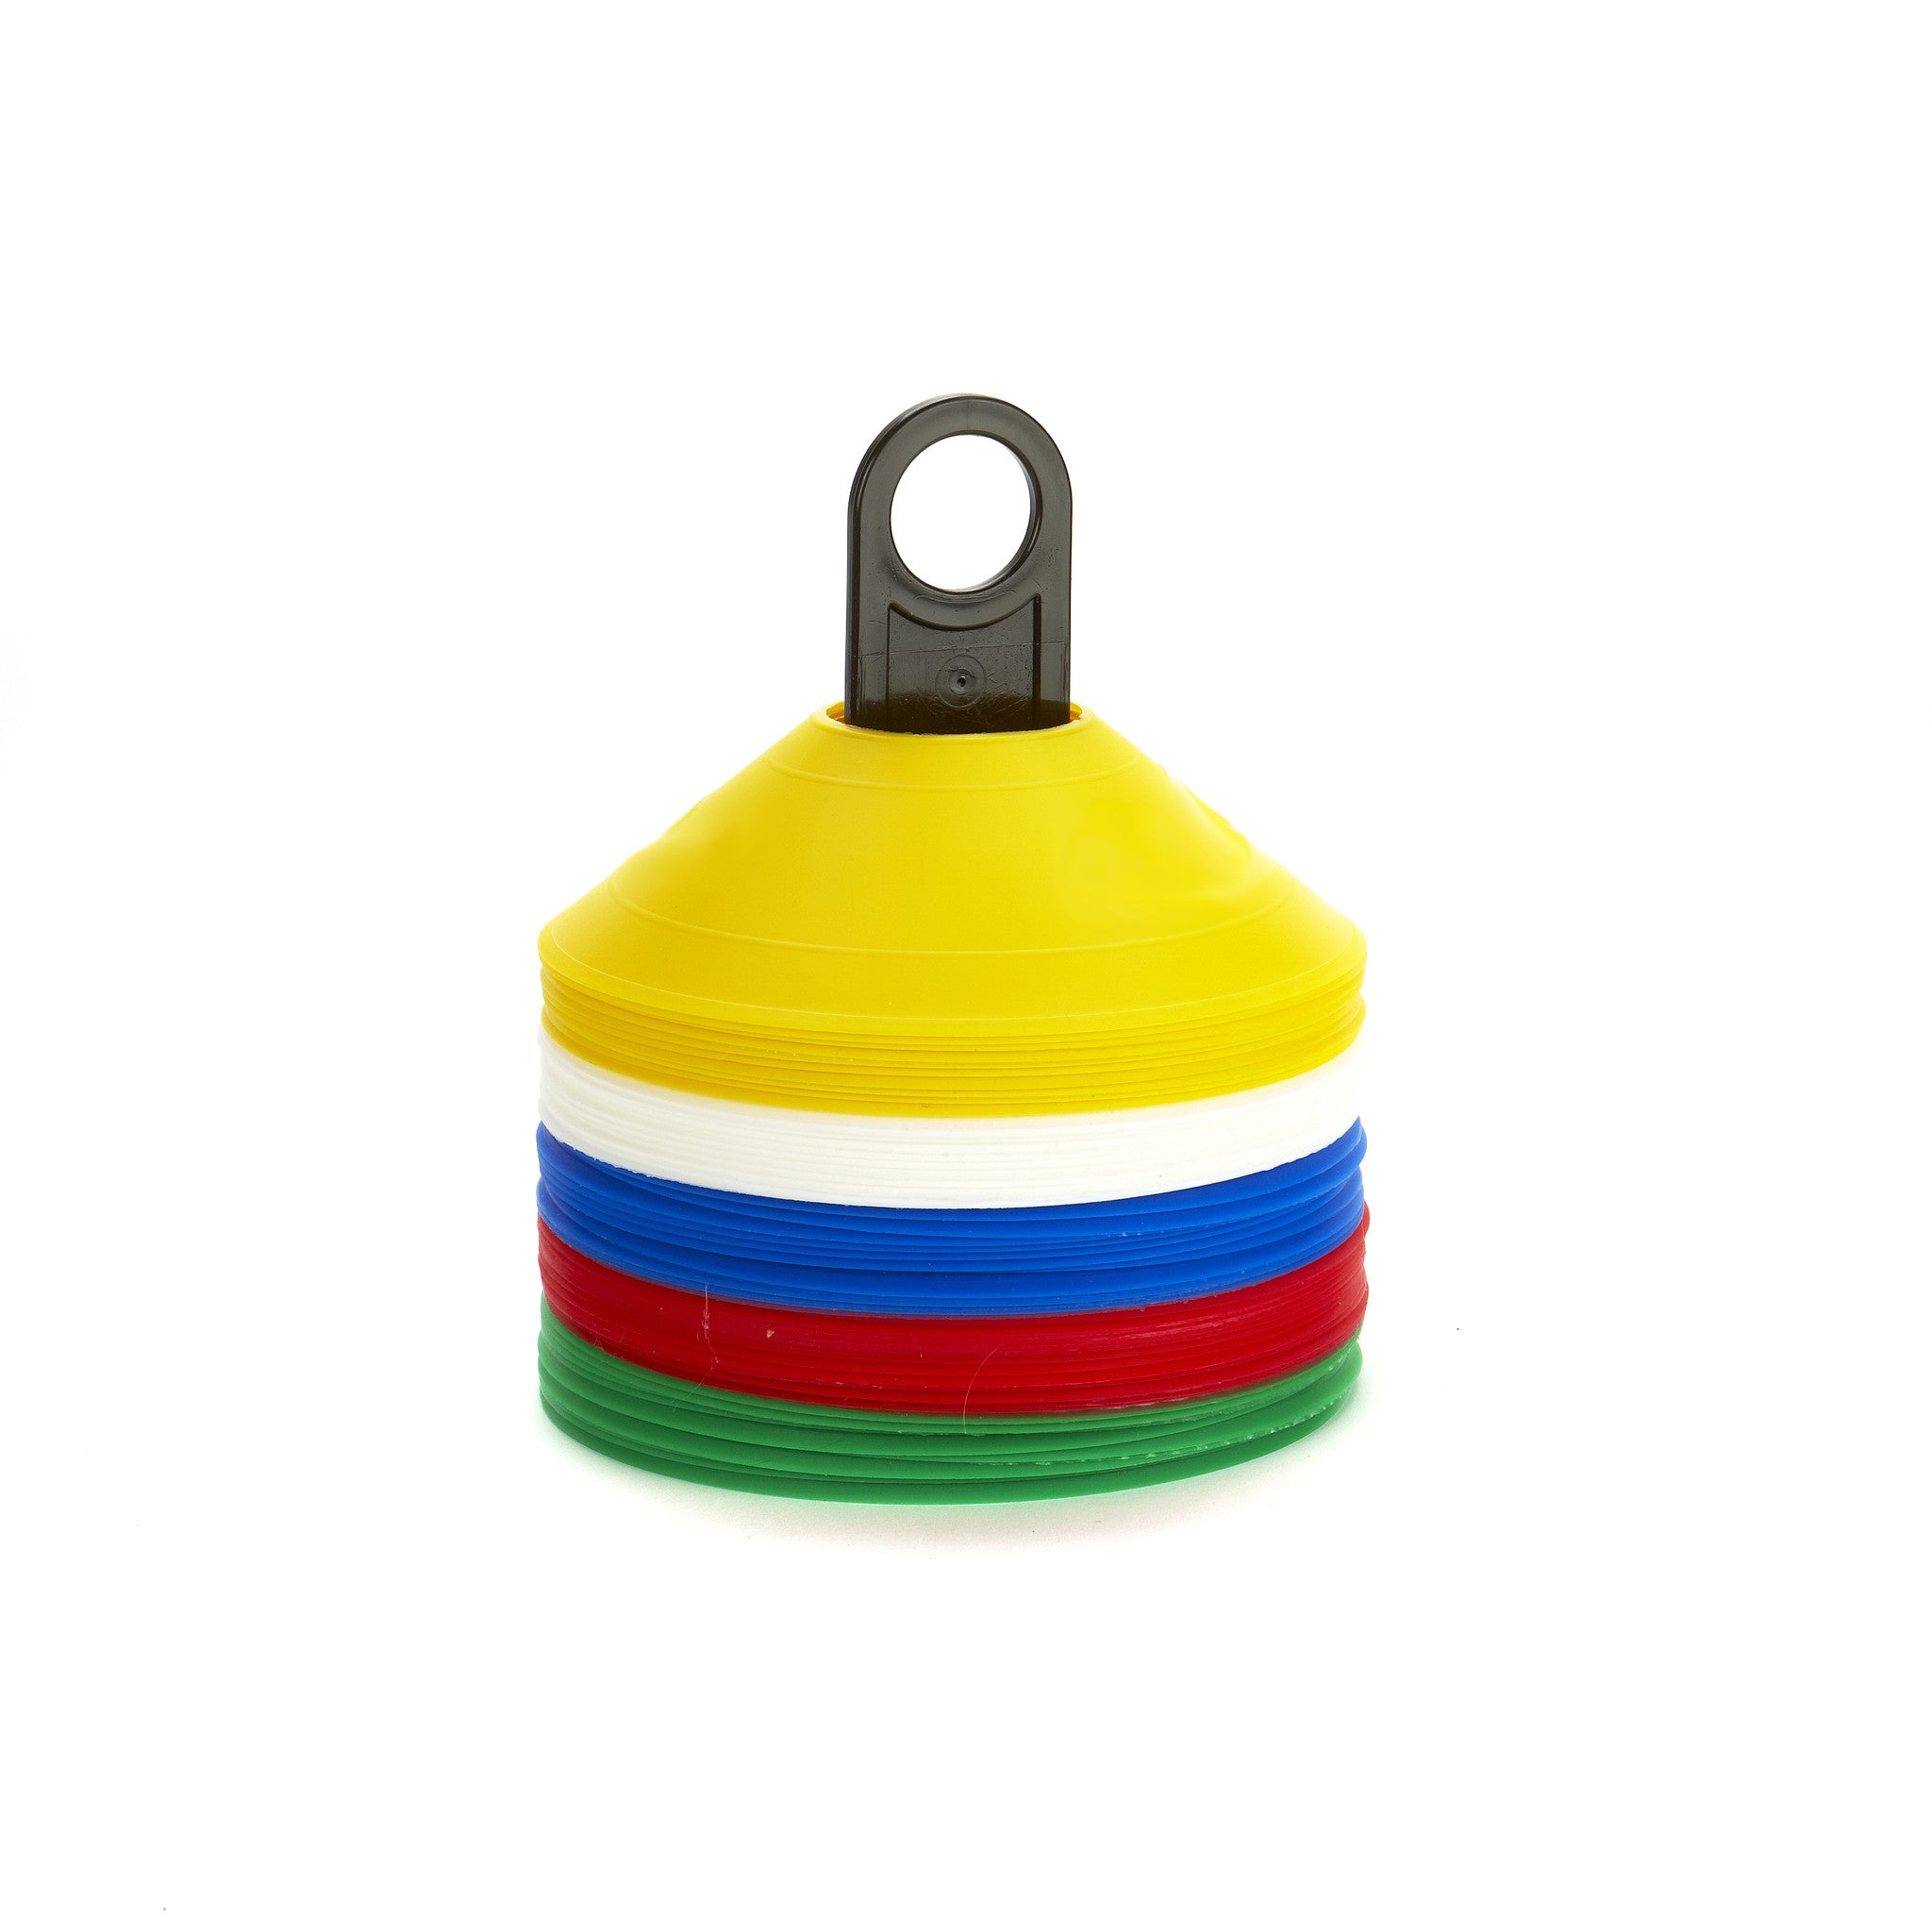 Tennis Coaches' favourite. Soft, safe, colourful Sports Markers. Set of 50 red, green, blue, yellow & white markers on a carry pole.